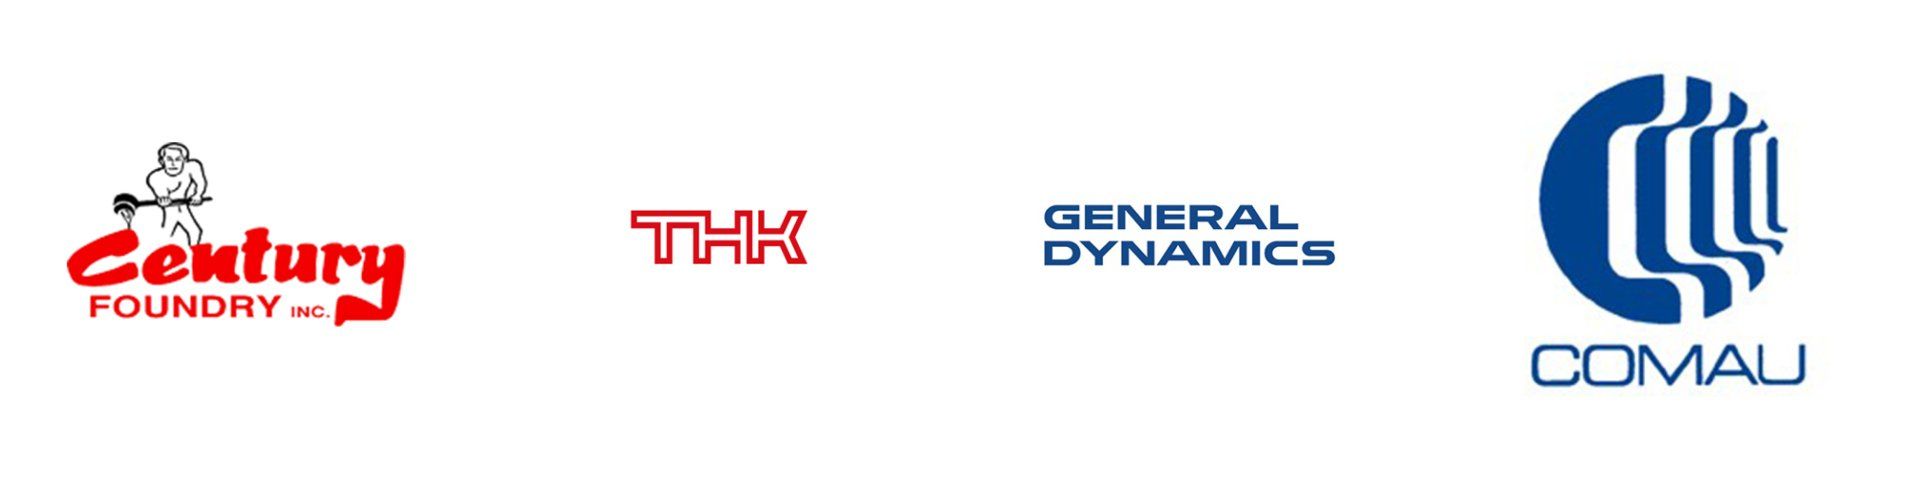 Century Foundry, THK, General Dynamics and Comau Logos